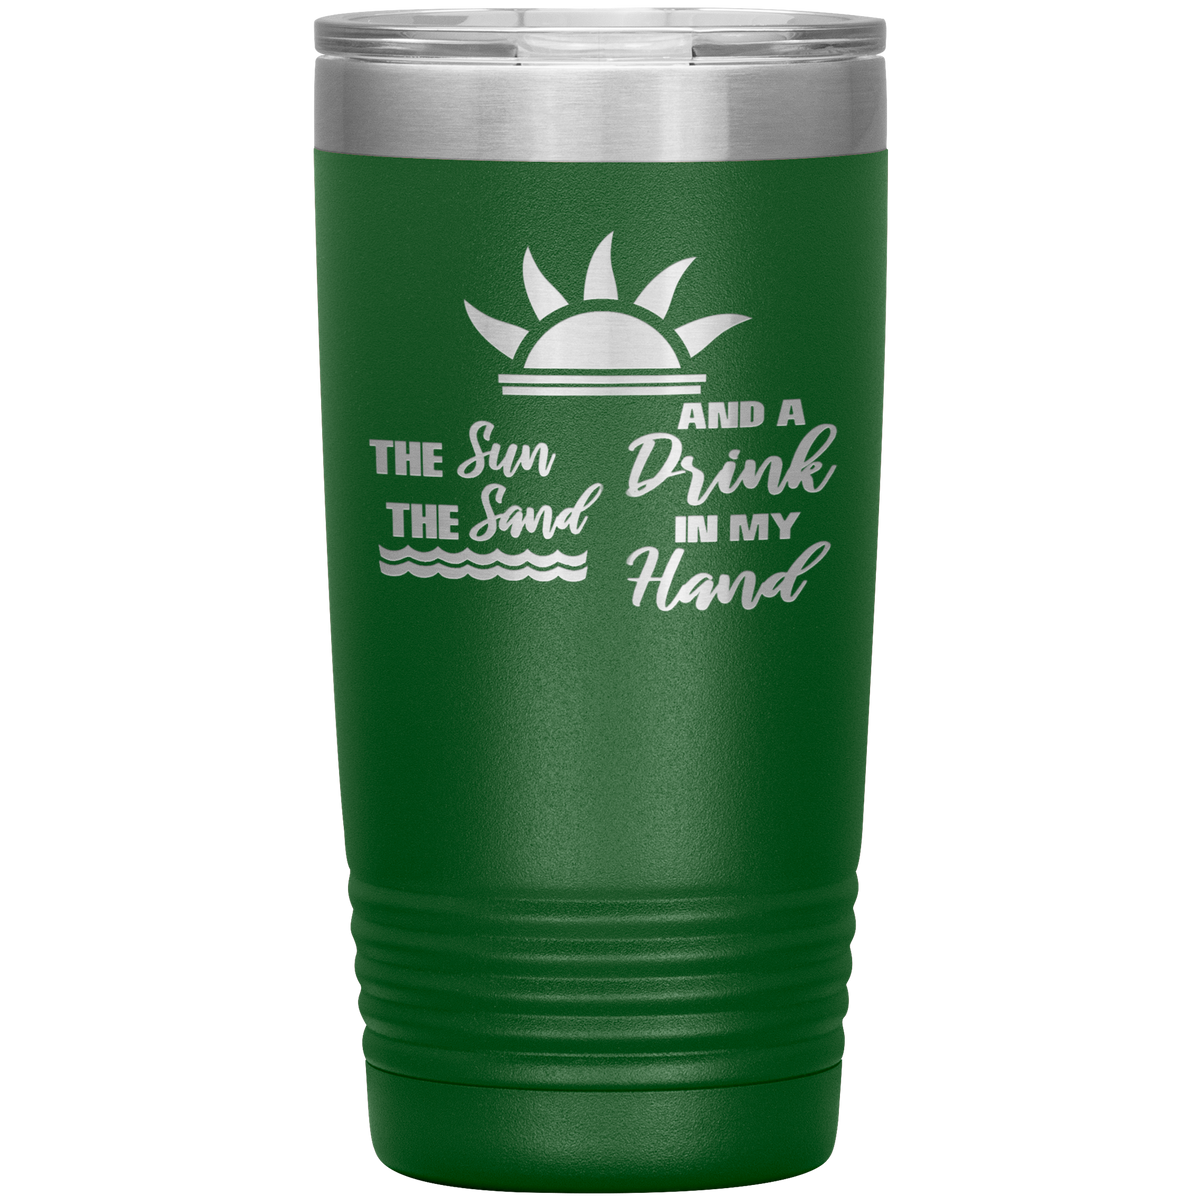 The Sun The Sand Drink In My Hand Tumbler